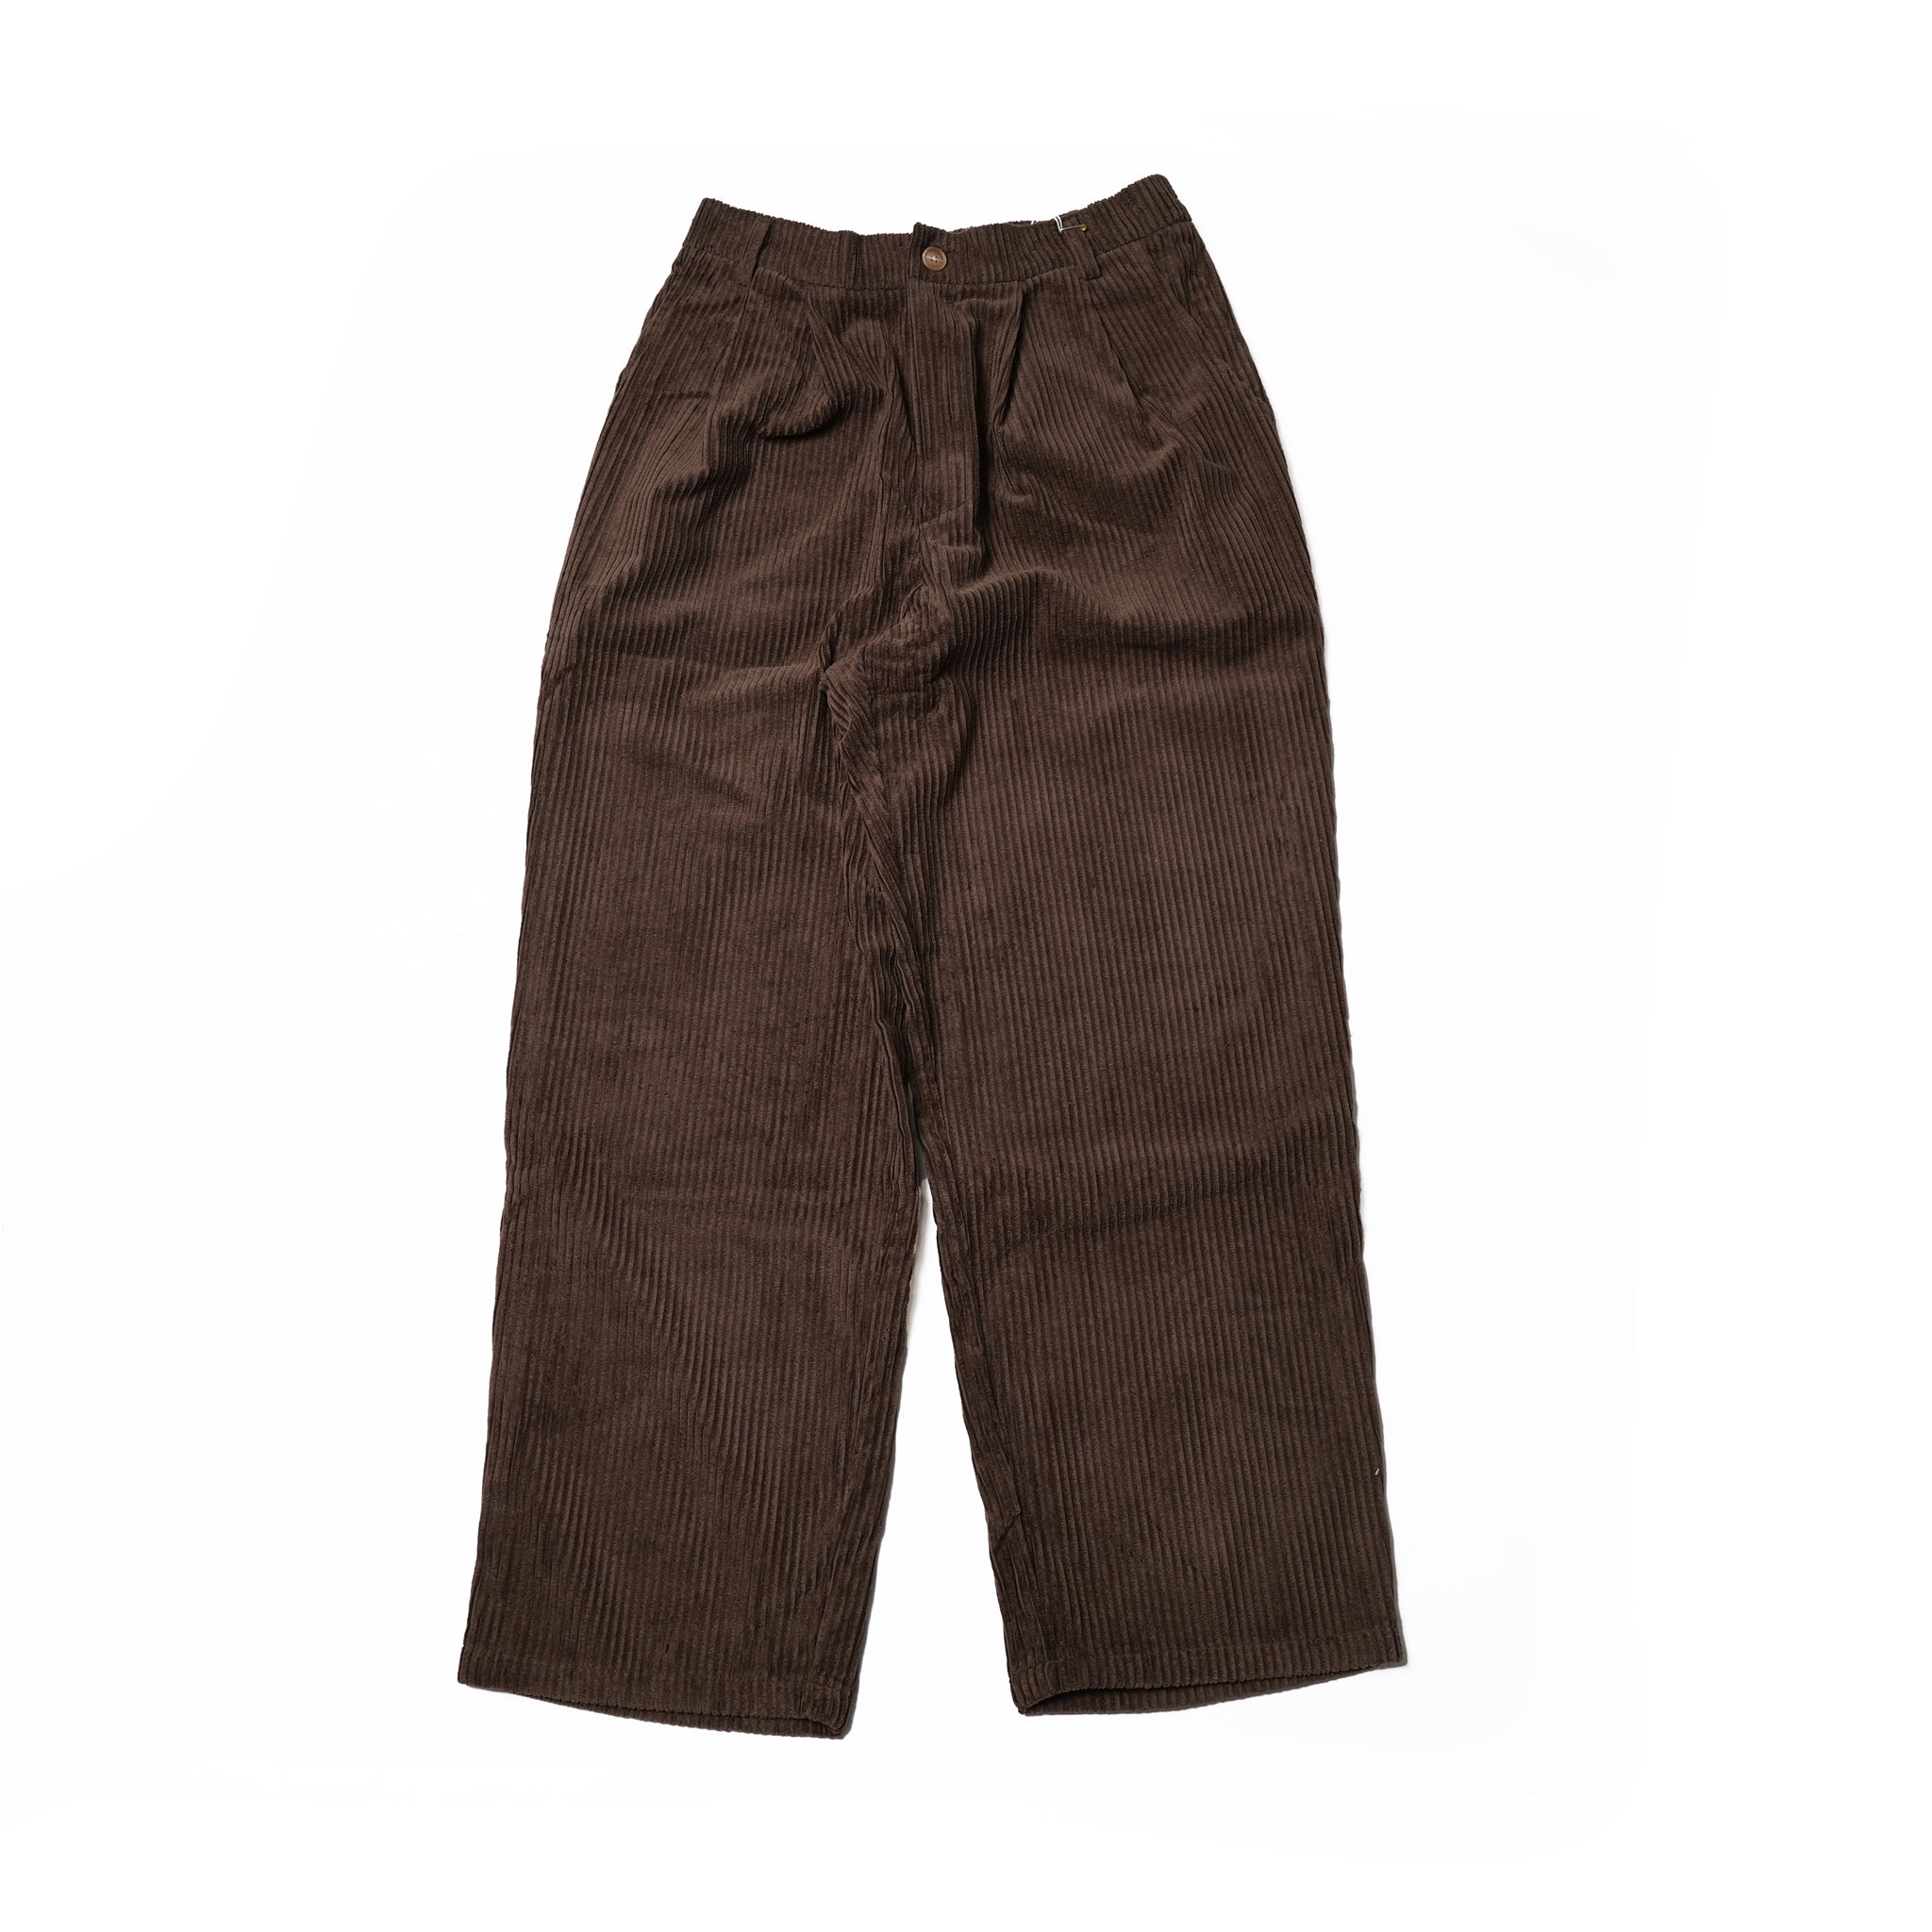 No:co-2023aw03d | Name:EASY WIDE CORDUROYPANTS | Color:Brown【CONICHIWA BONJOUR_コニチワボンジュール】